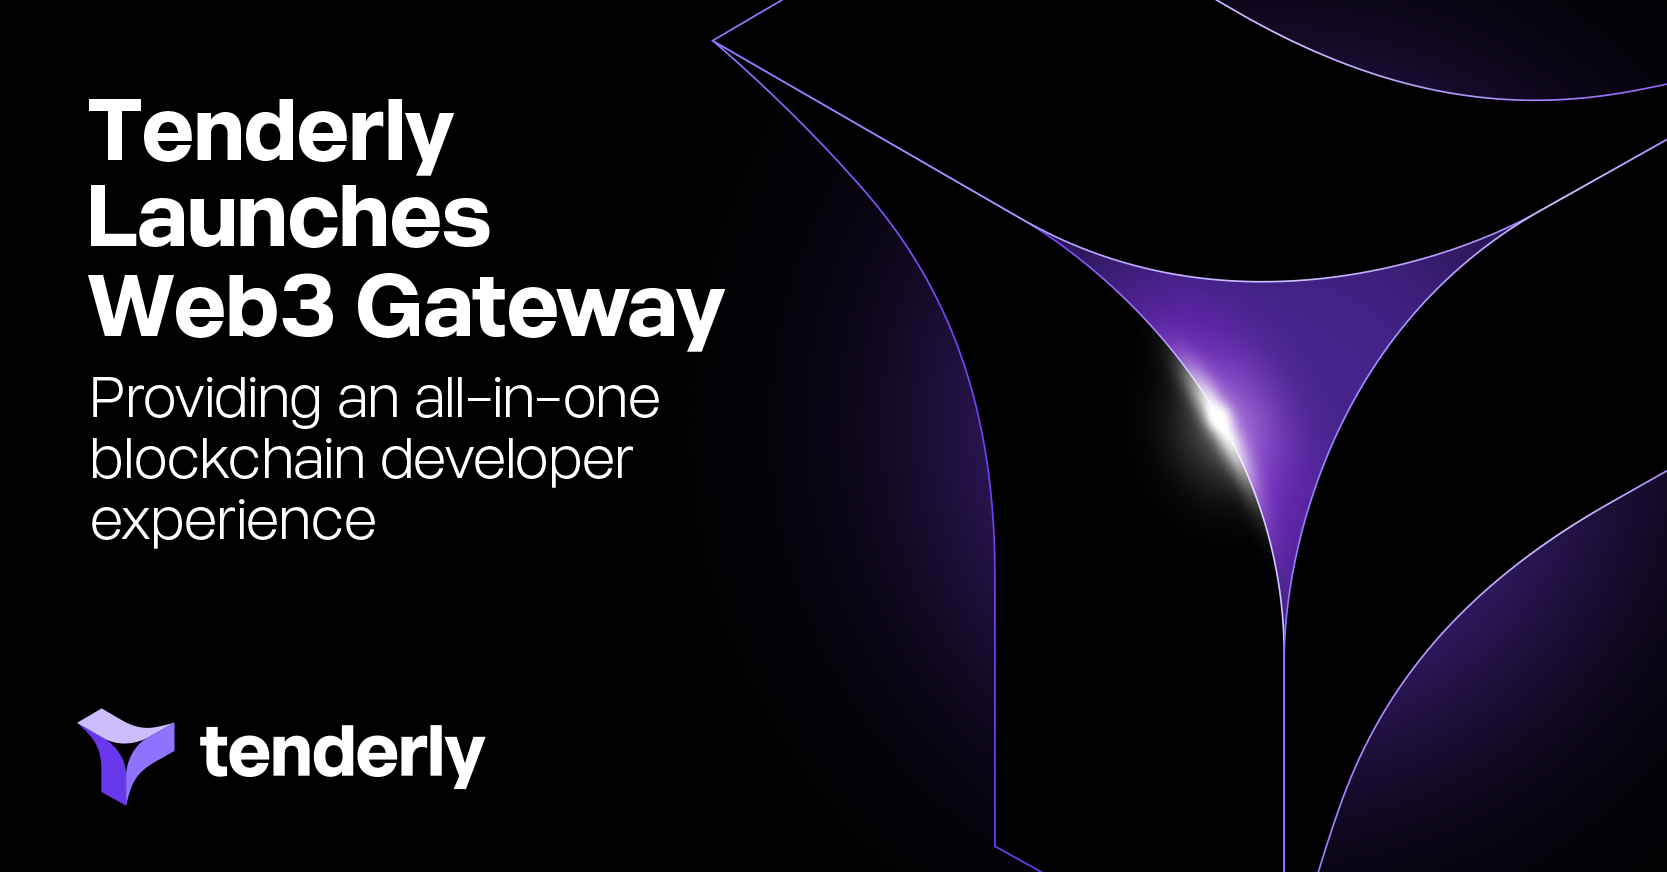 Introducing Tenderly Web3 Gateway for an All-in-One Web3 Developer Experience